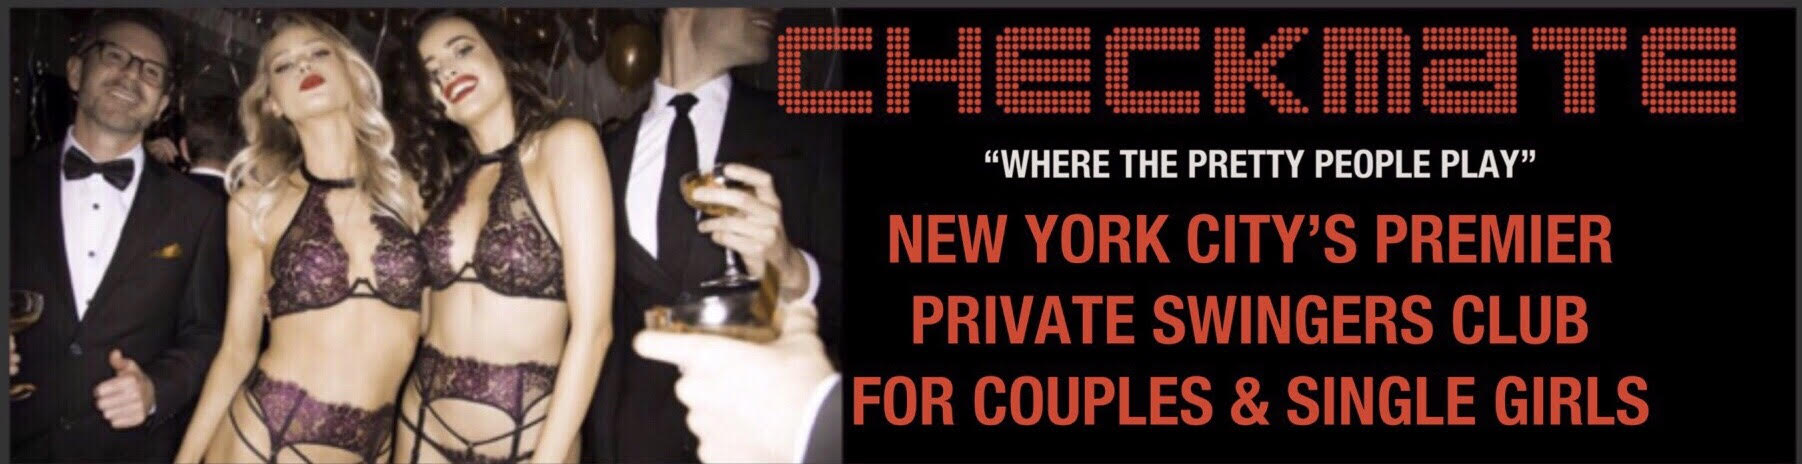 Checkmate NYC and upcoming Beverly Hills Swinger Club